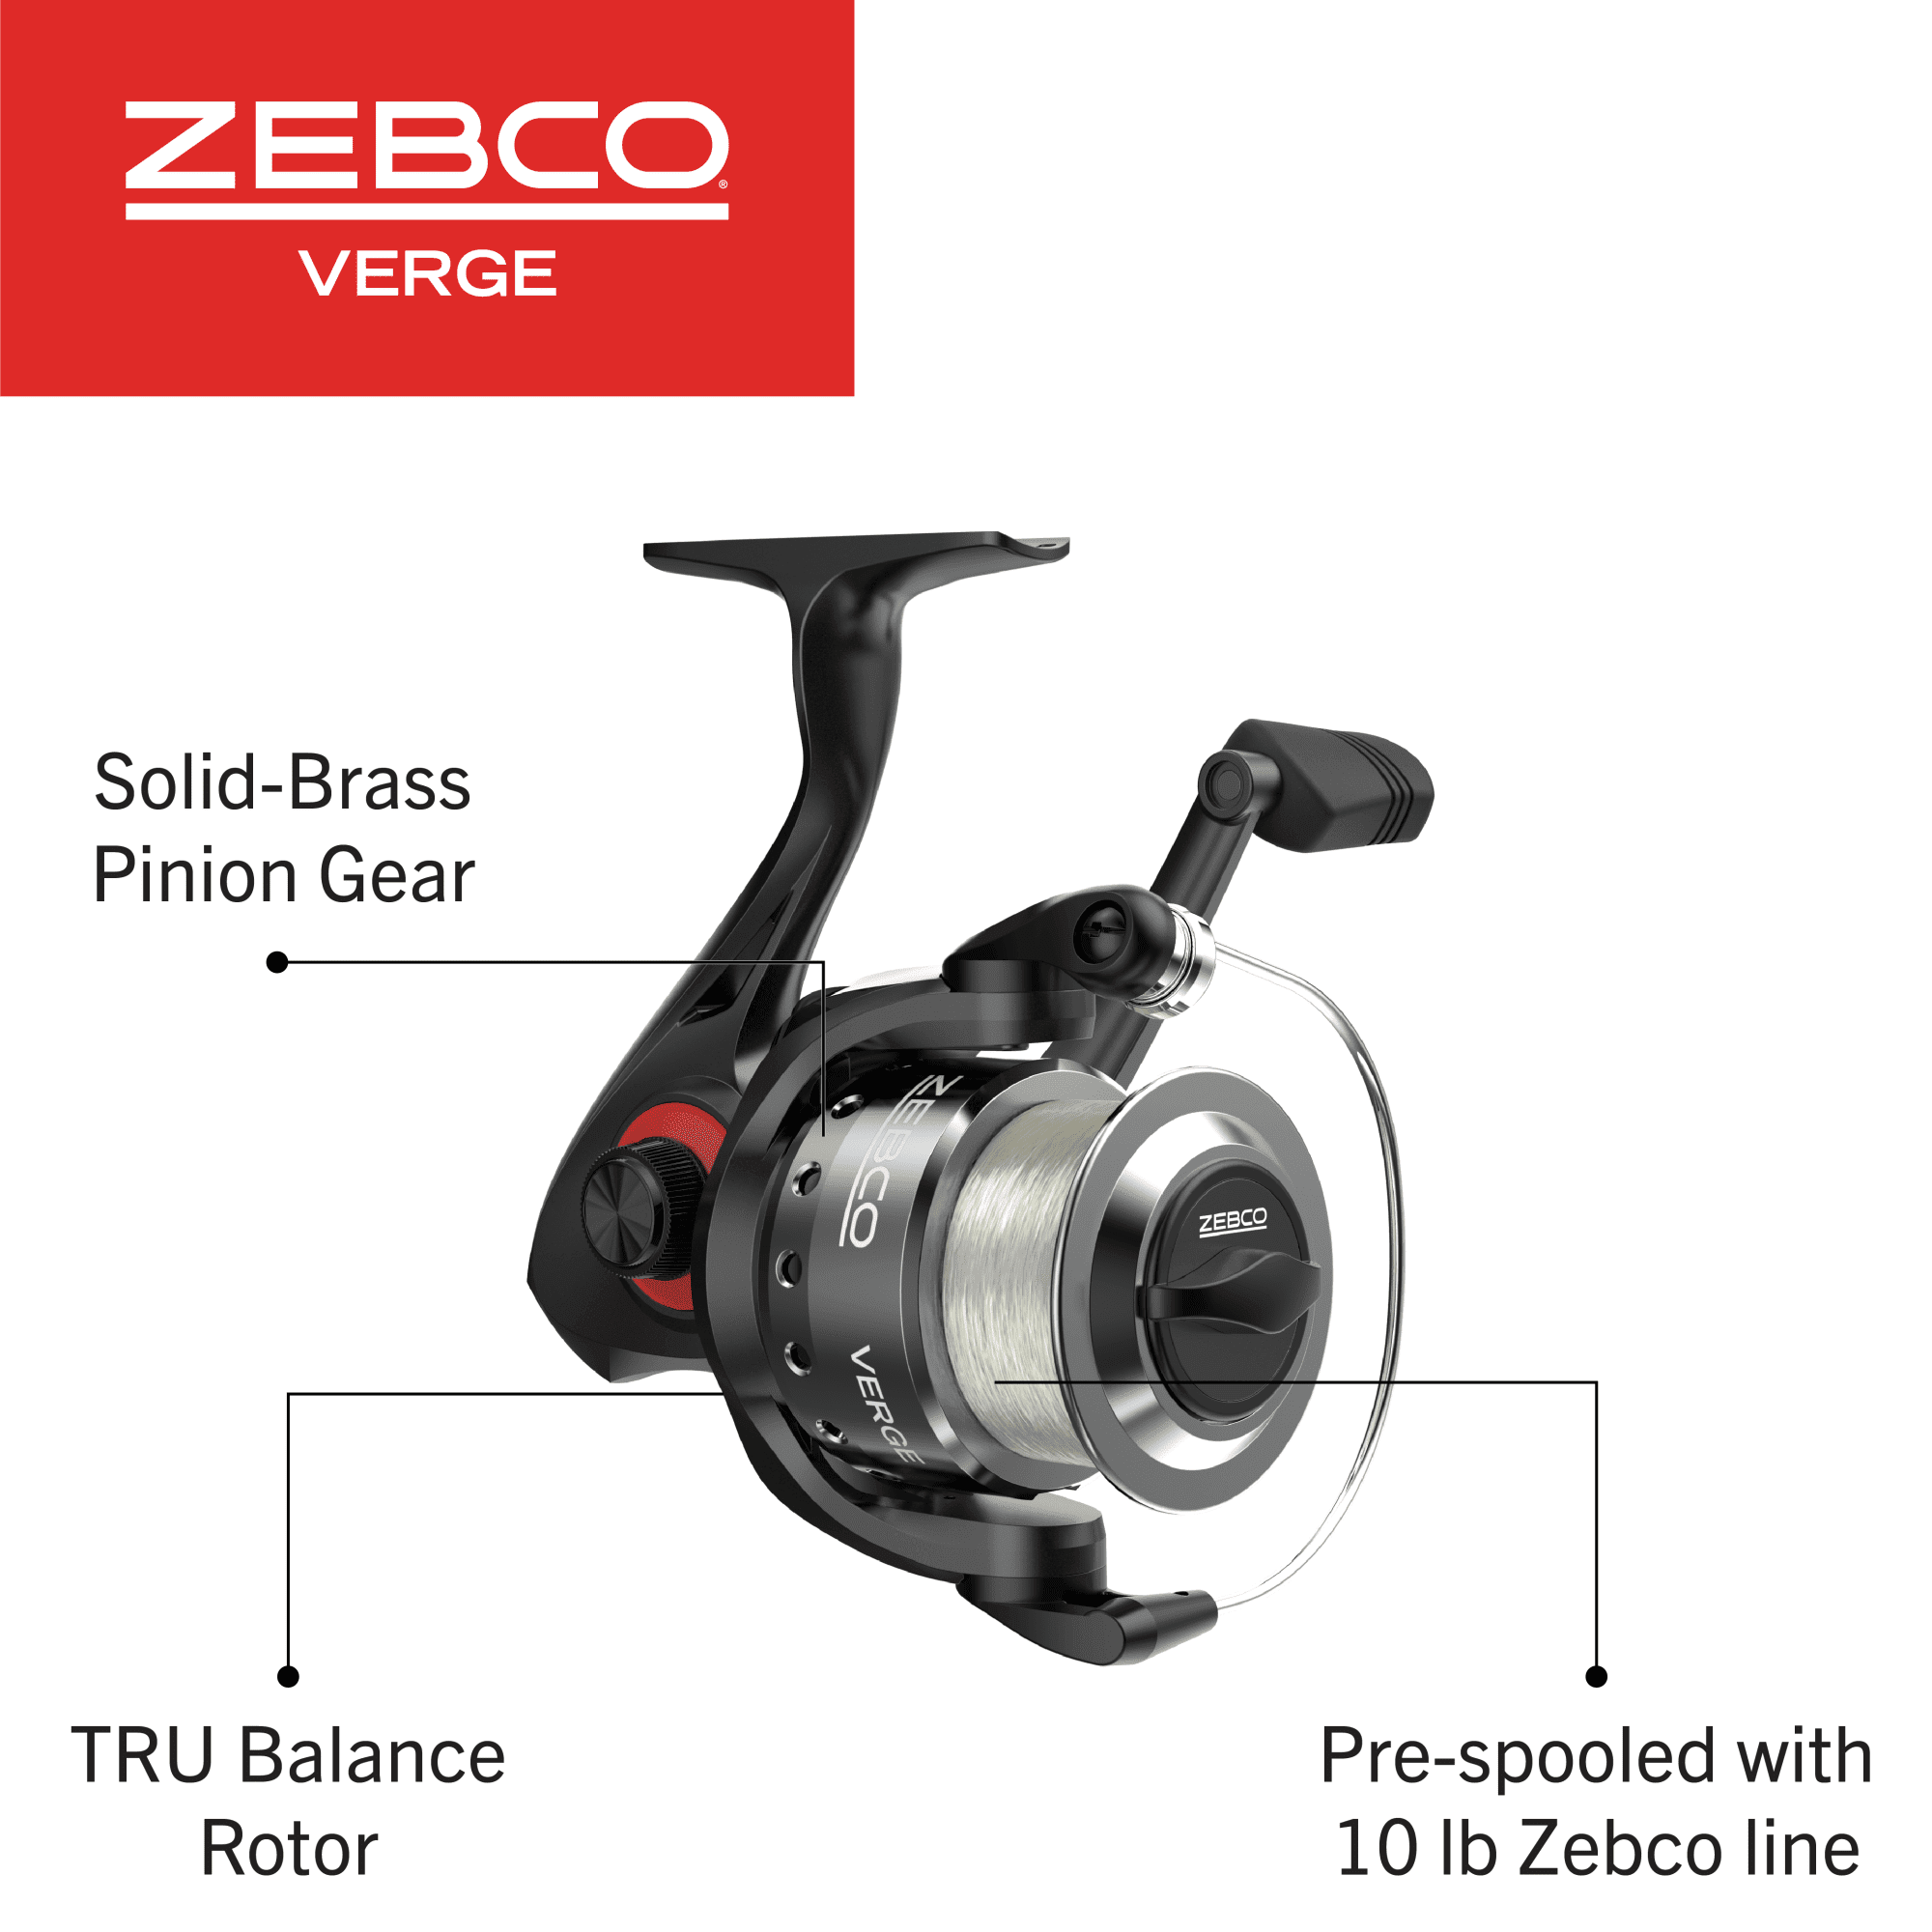 Zebco Verge Spinning Fishing Reel, Size 30 Reel, Changeable Right